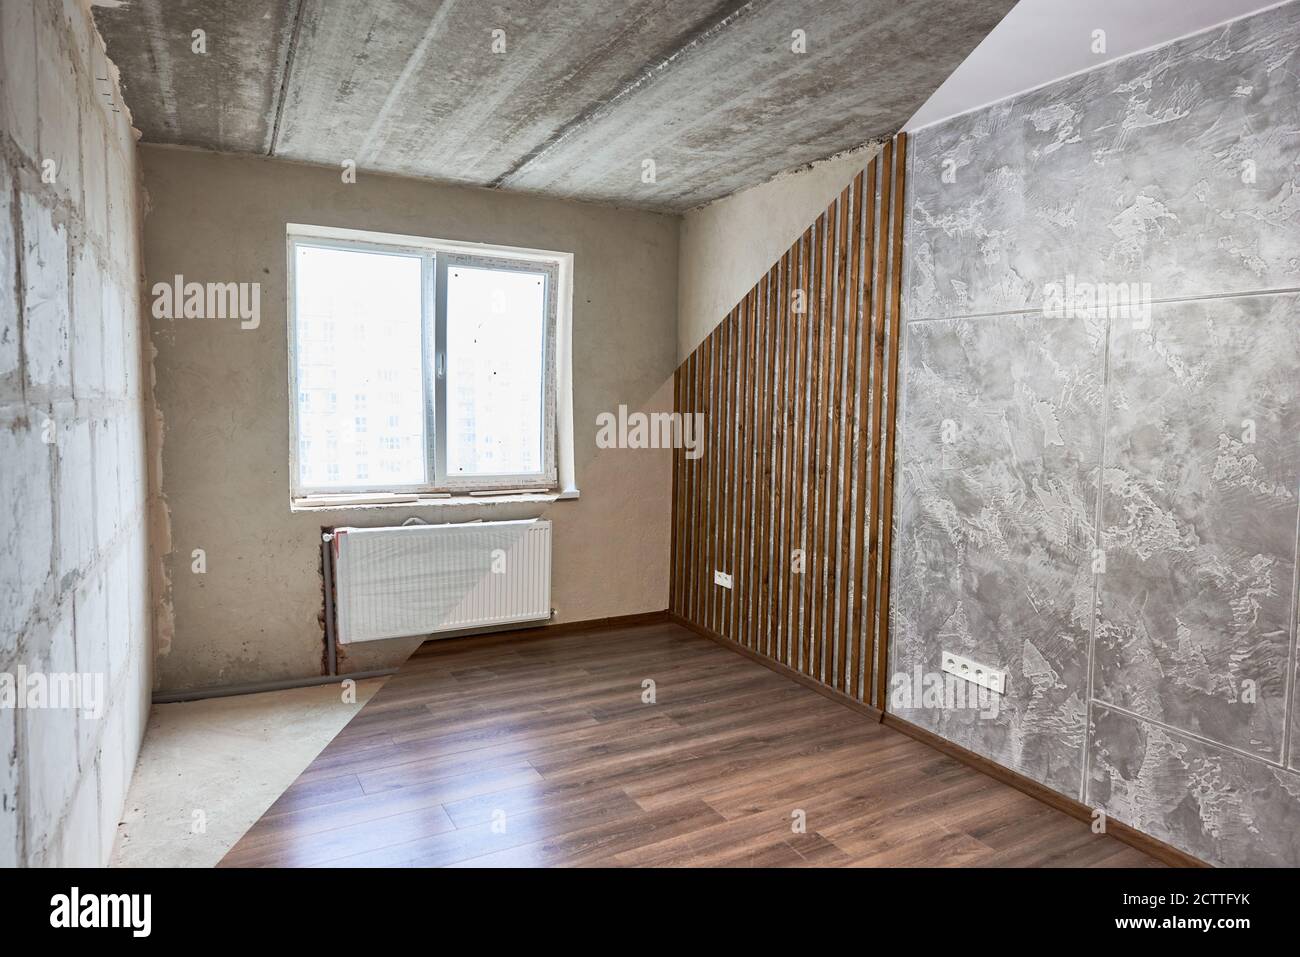 Comparative image of room before and after repairs. Unfinished walls made of blocks, ceiling vs shiny finished walls and wood floor. Concept of home restoration and renovation. Stock Photo